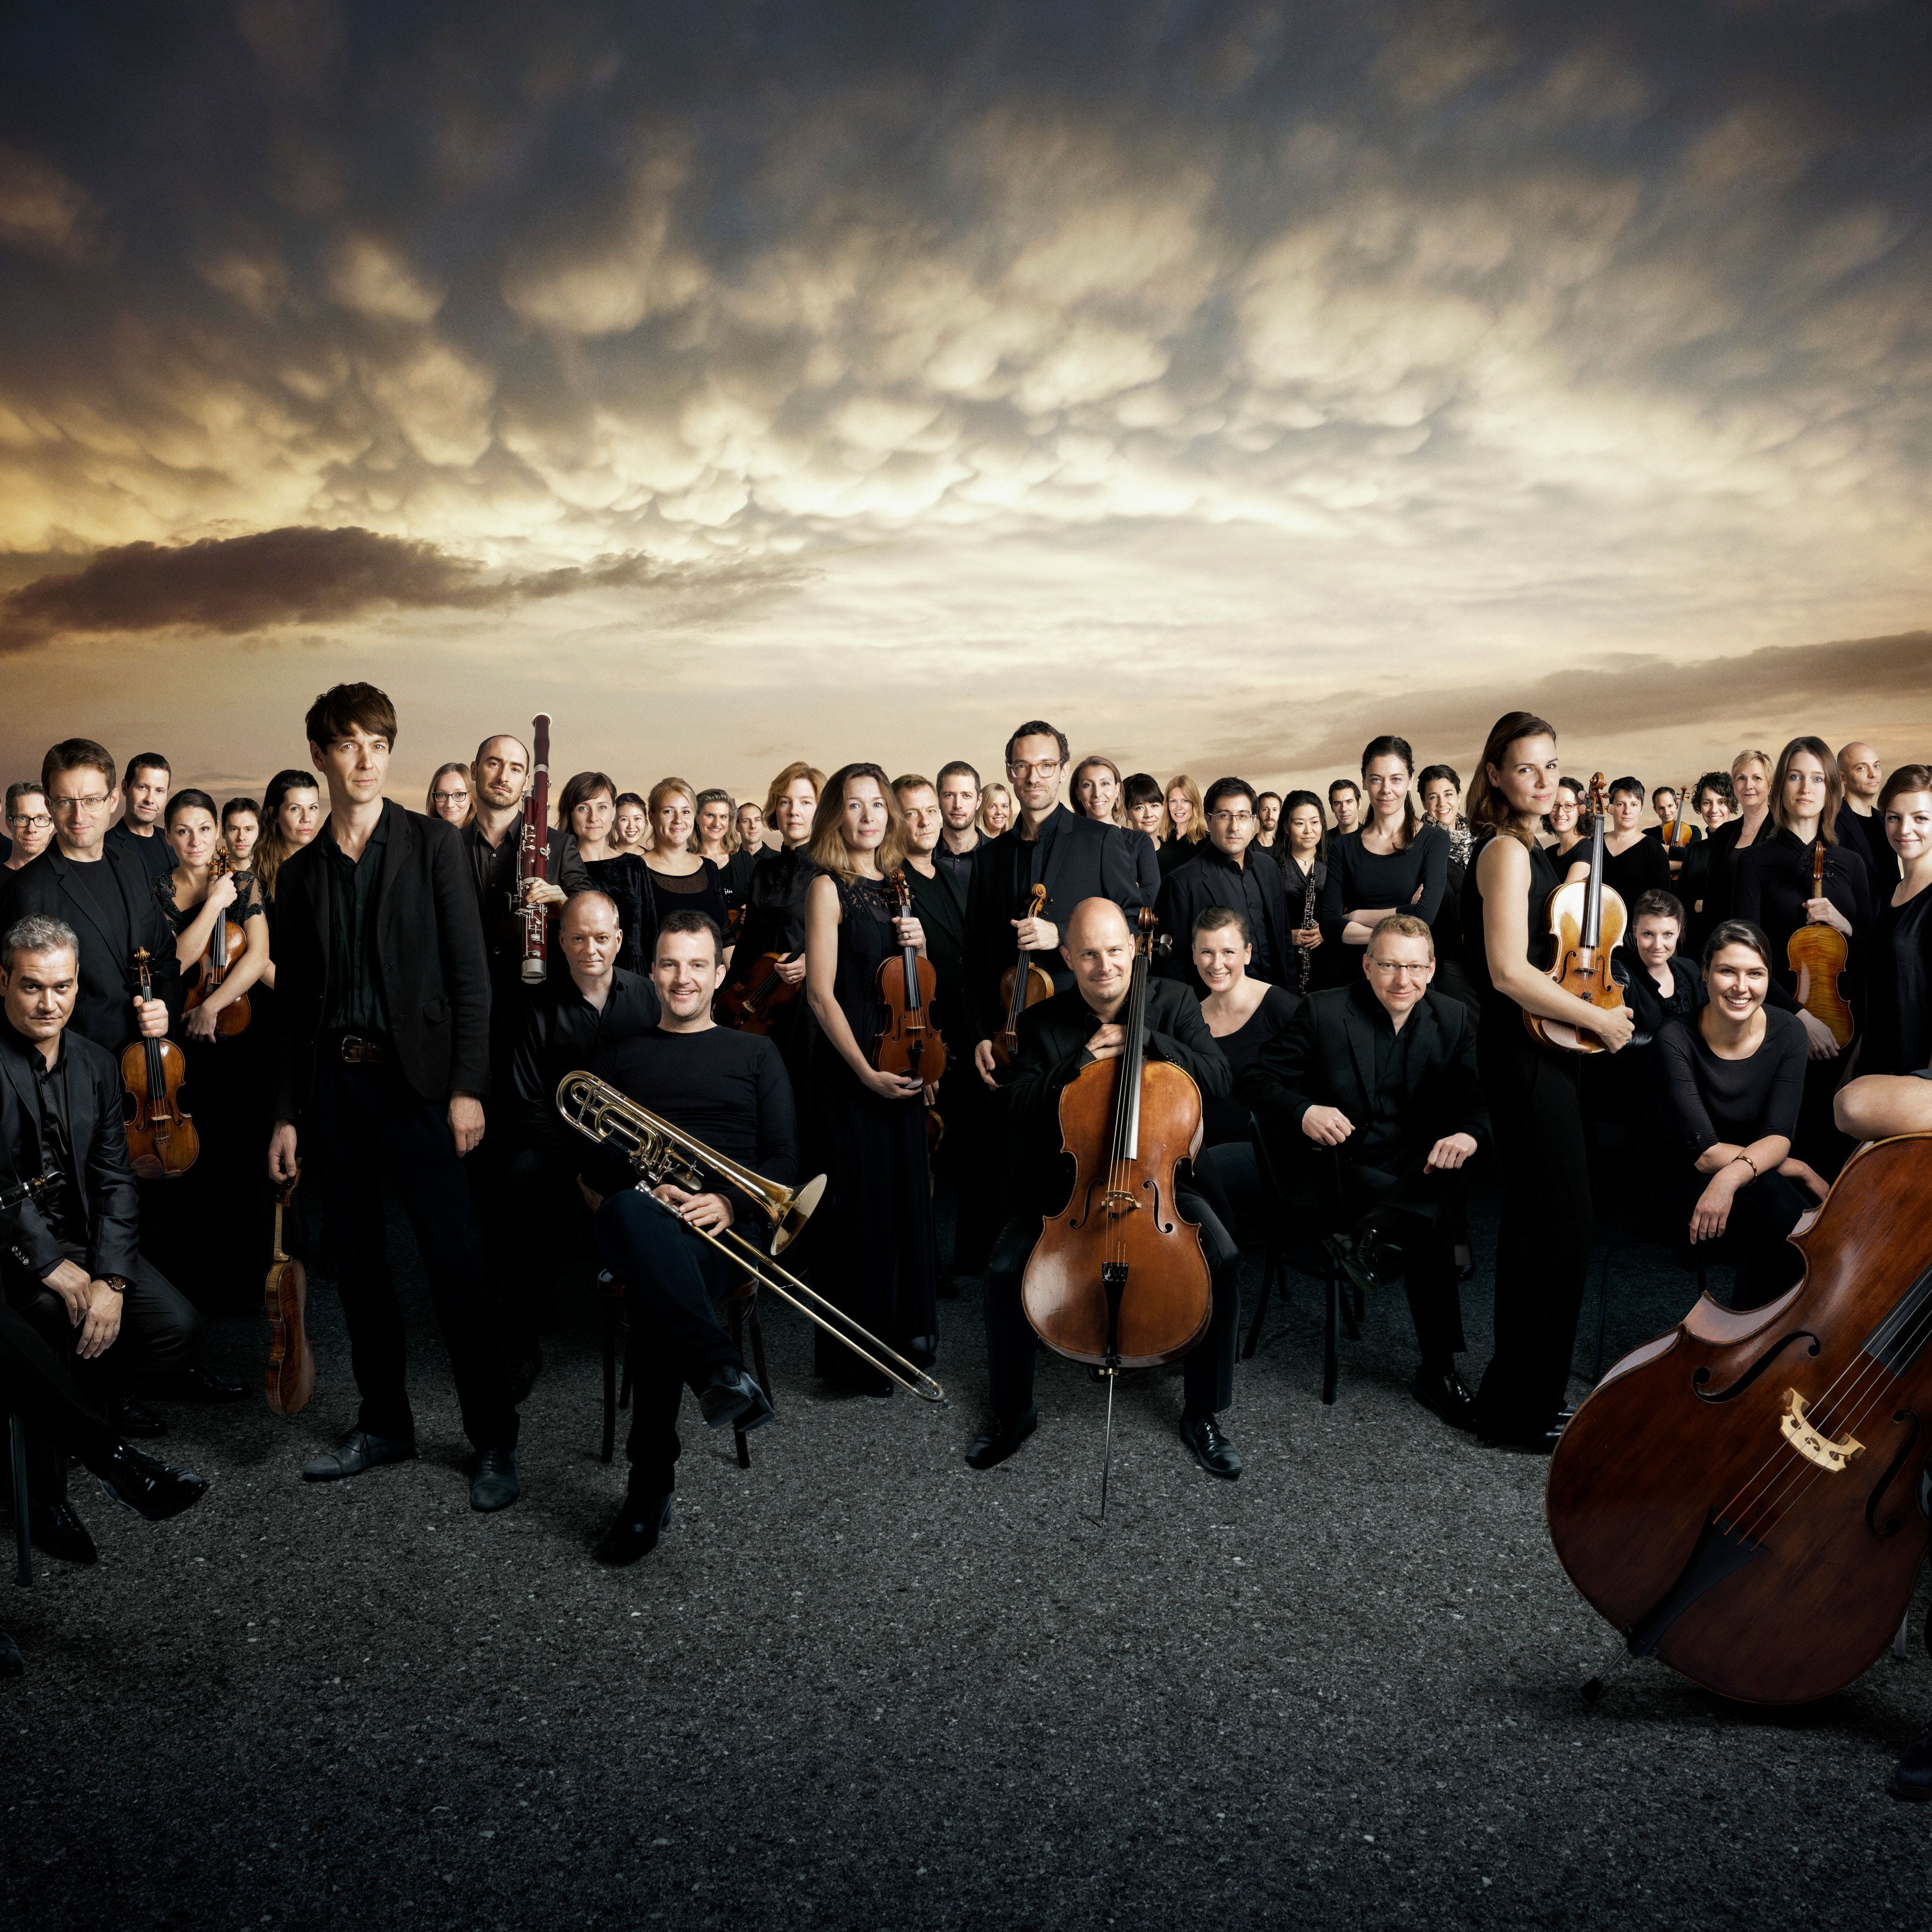 Group picture of the orchestra in front of a dramatic sky